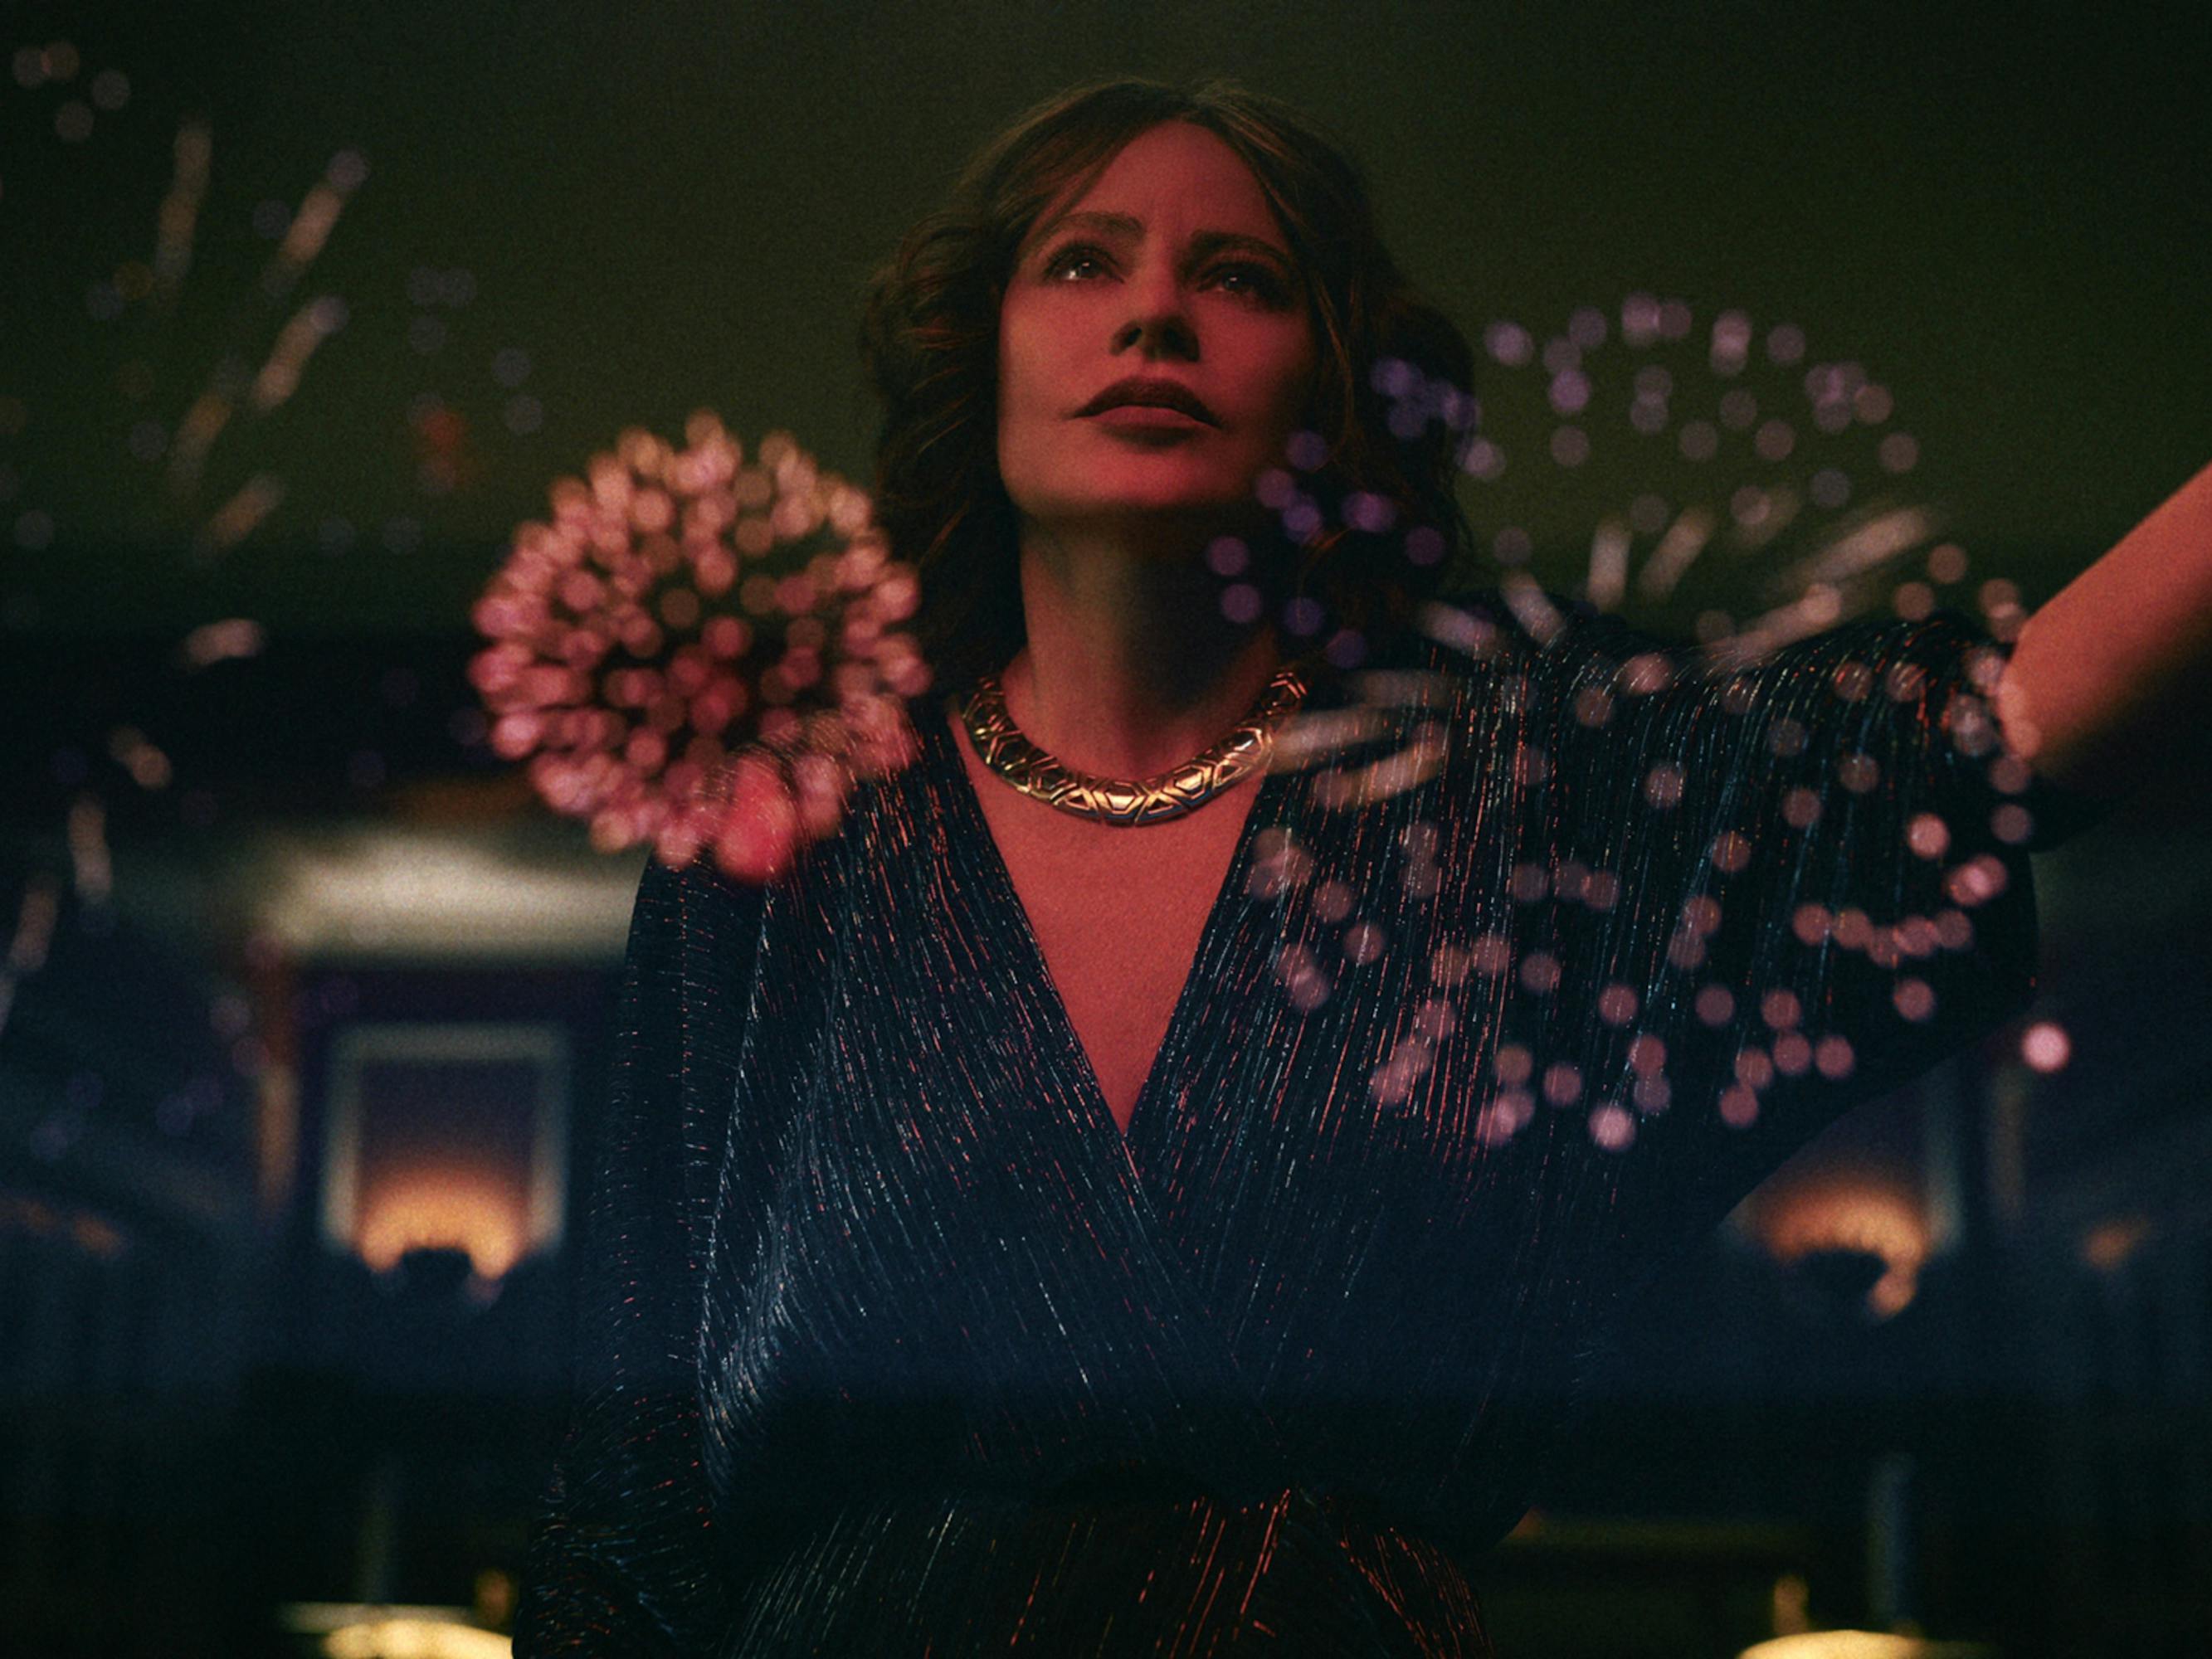 Griselda (Sofia Vergara) stands in front of a window, with the reflection of fireworks lighting up her face.